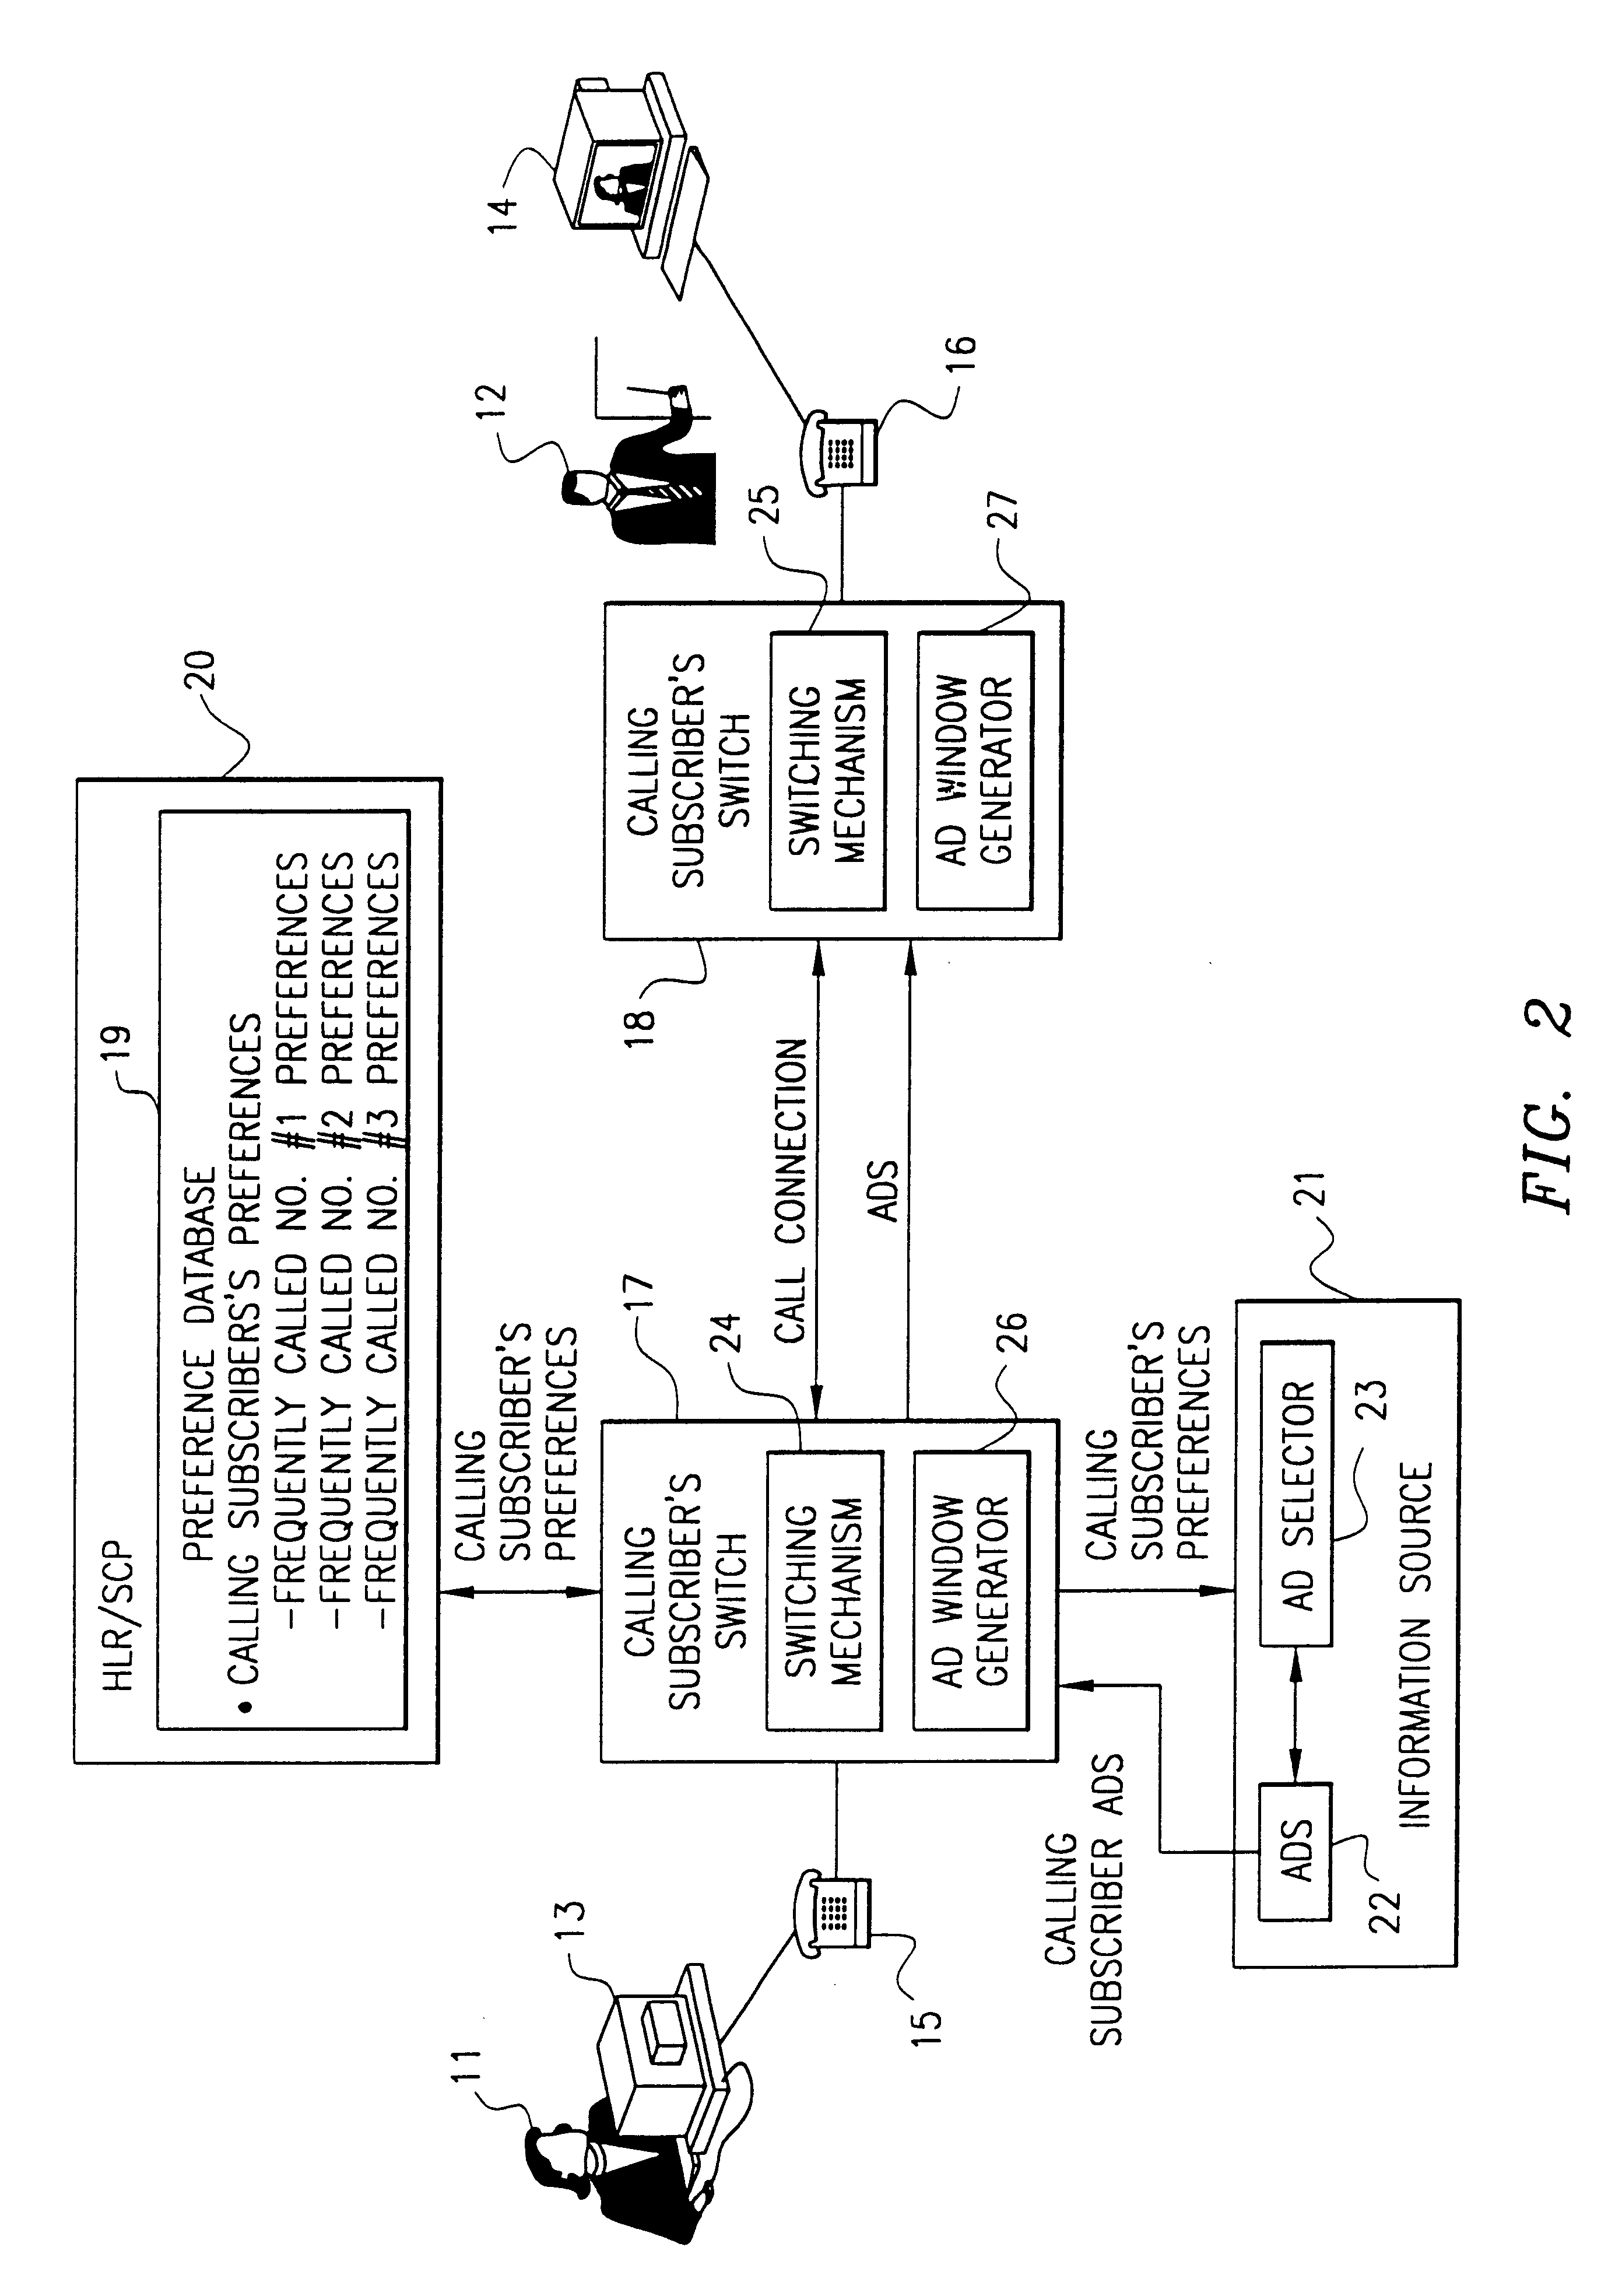 System and method of providing selected advertisements between subscribers utilizing video telephones